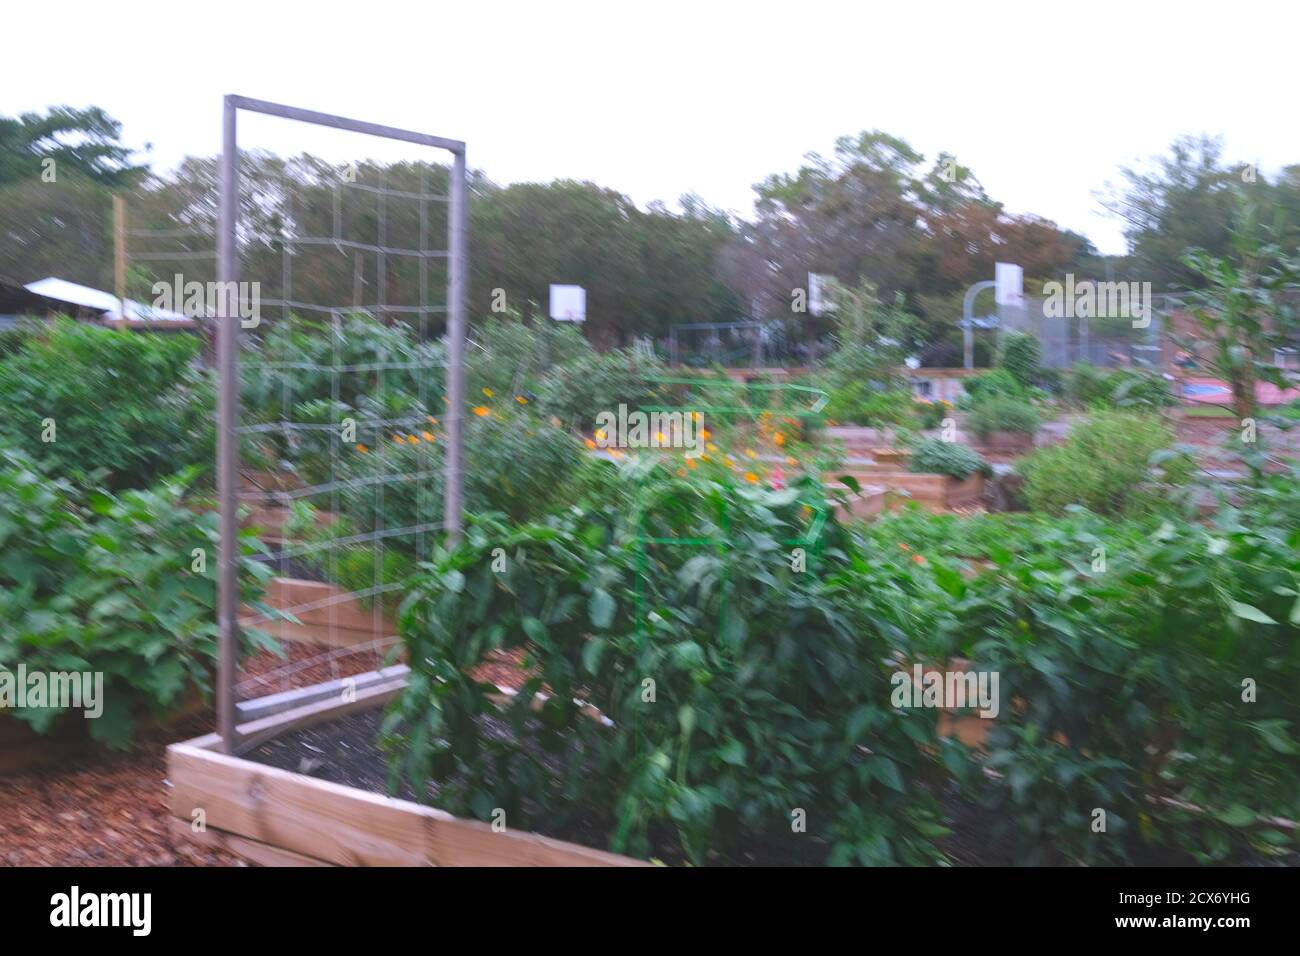 One New Urban Garden and a 2nd in Full Bloom, Providing Fresh Vegetables and a Follow-on Crop in the Future. Stock Photo